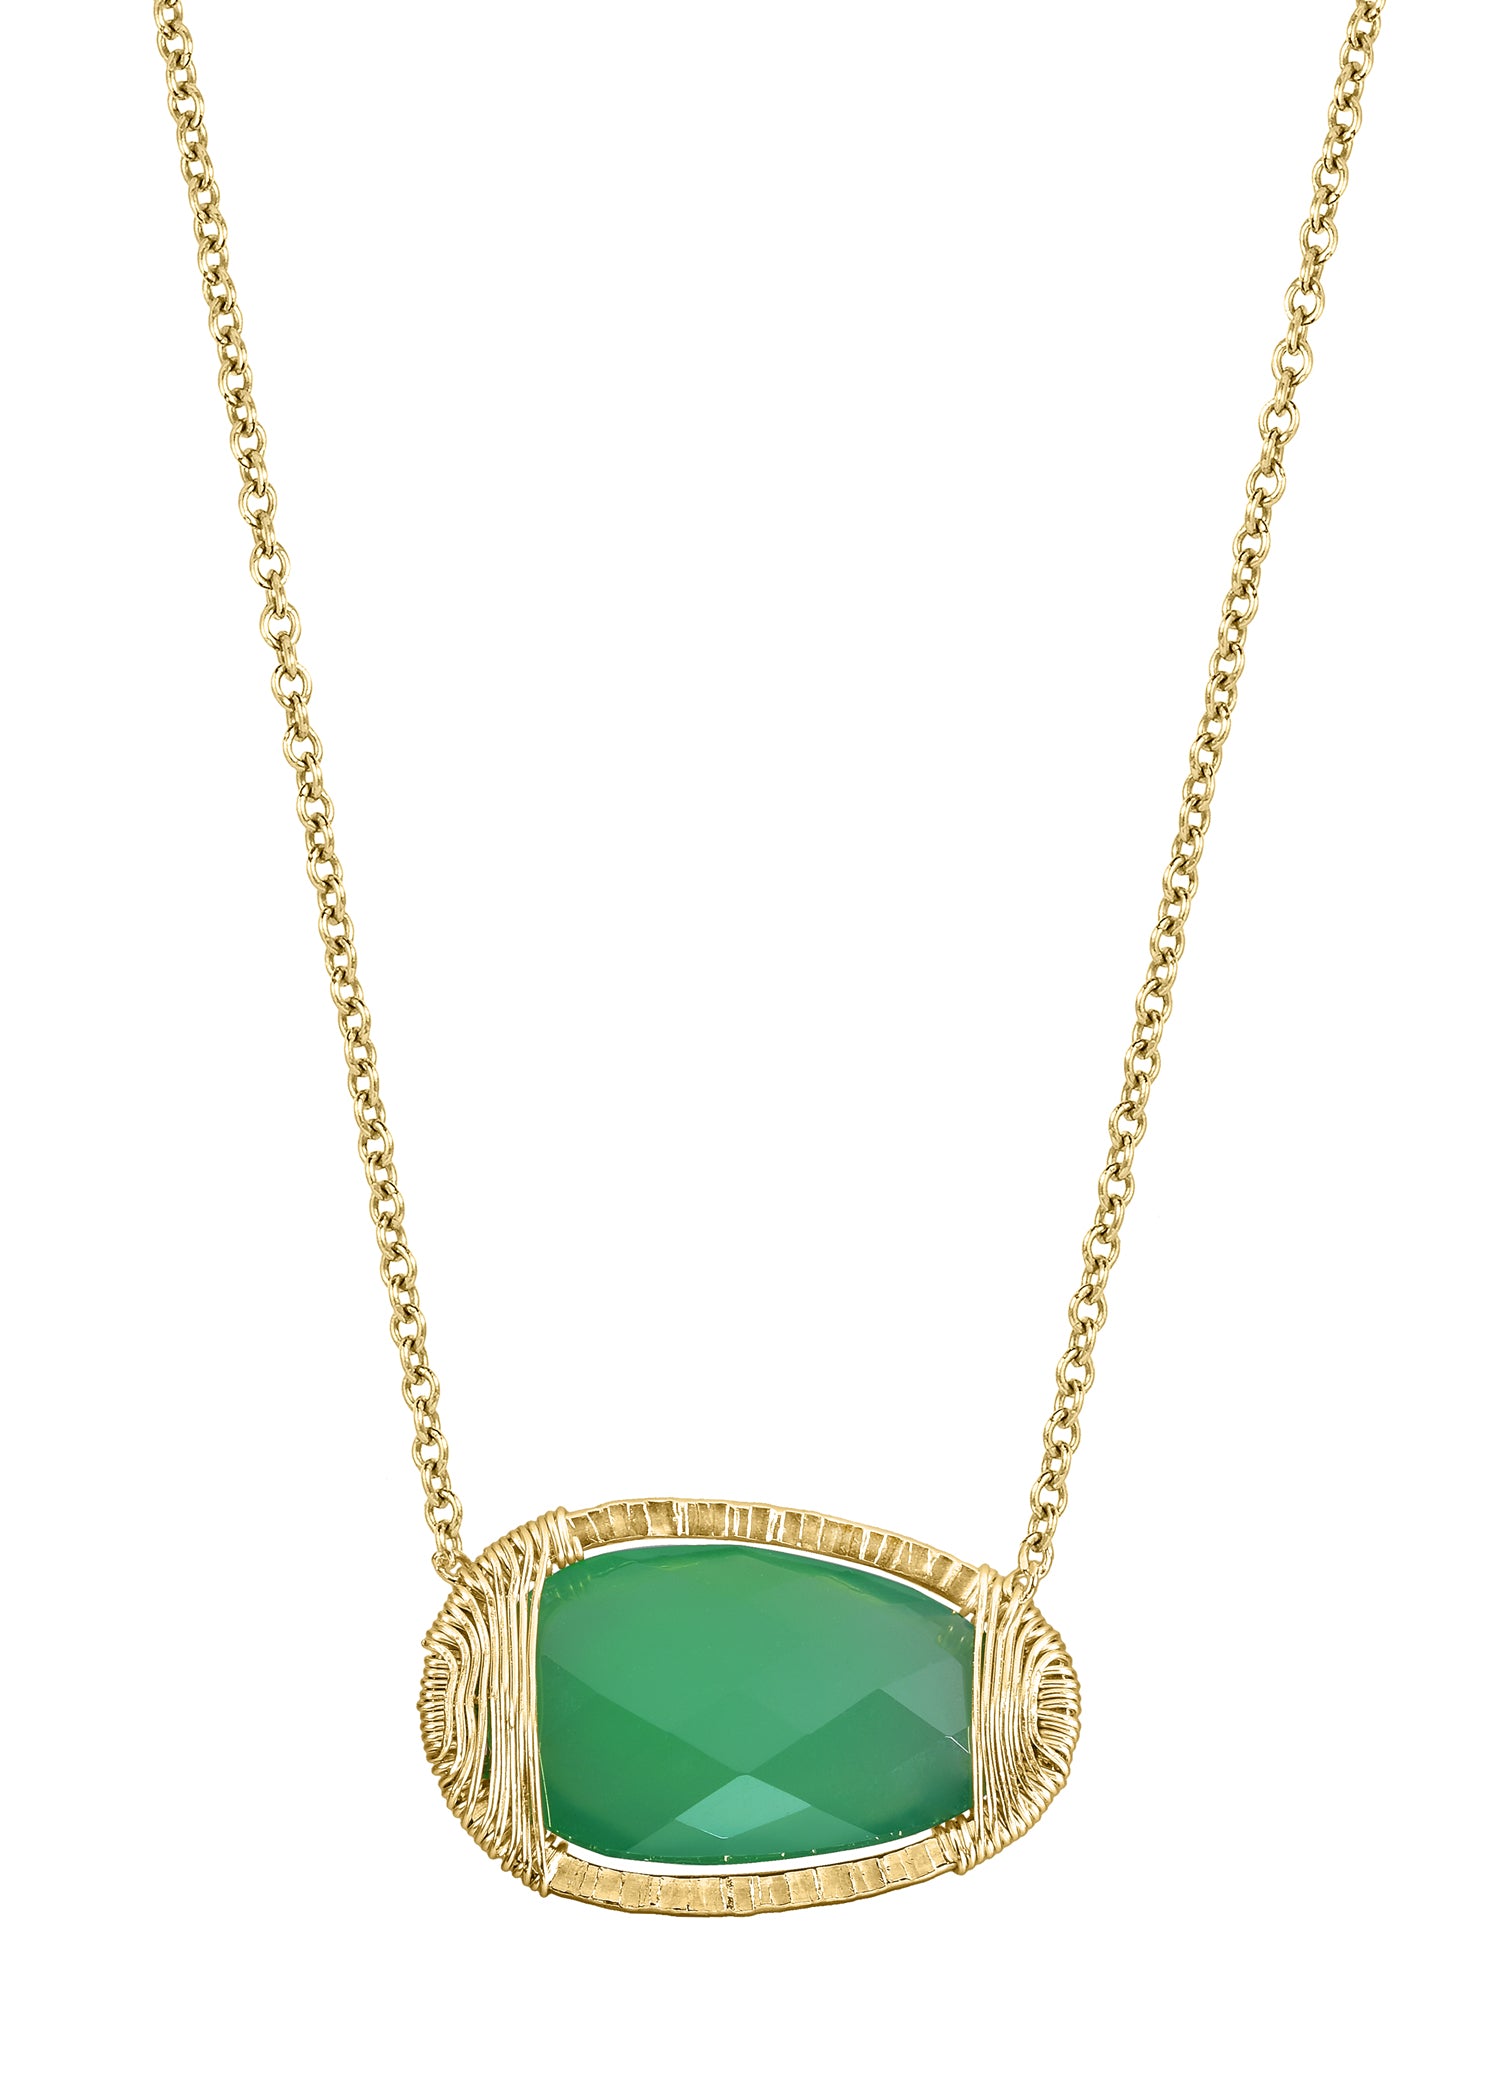 Green onyx 14k gold fill Necklace measures 15-7/8" in length Pendant measures 1/2" in length and 13/16" in width Handmade in our Los Angeles studio